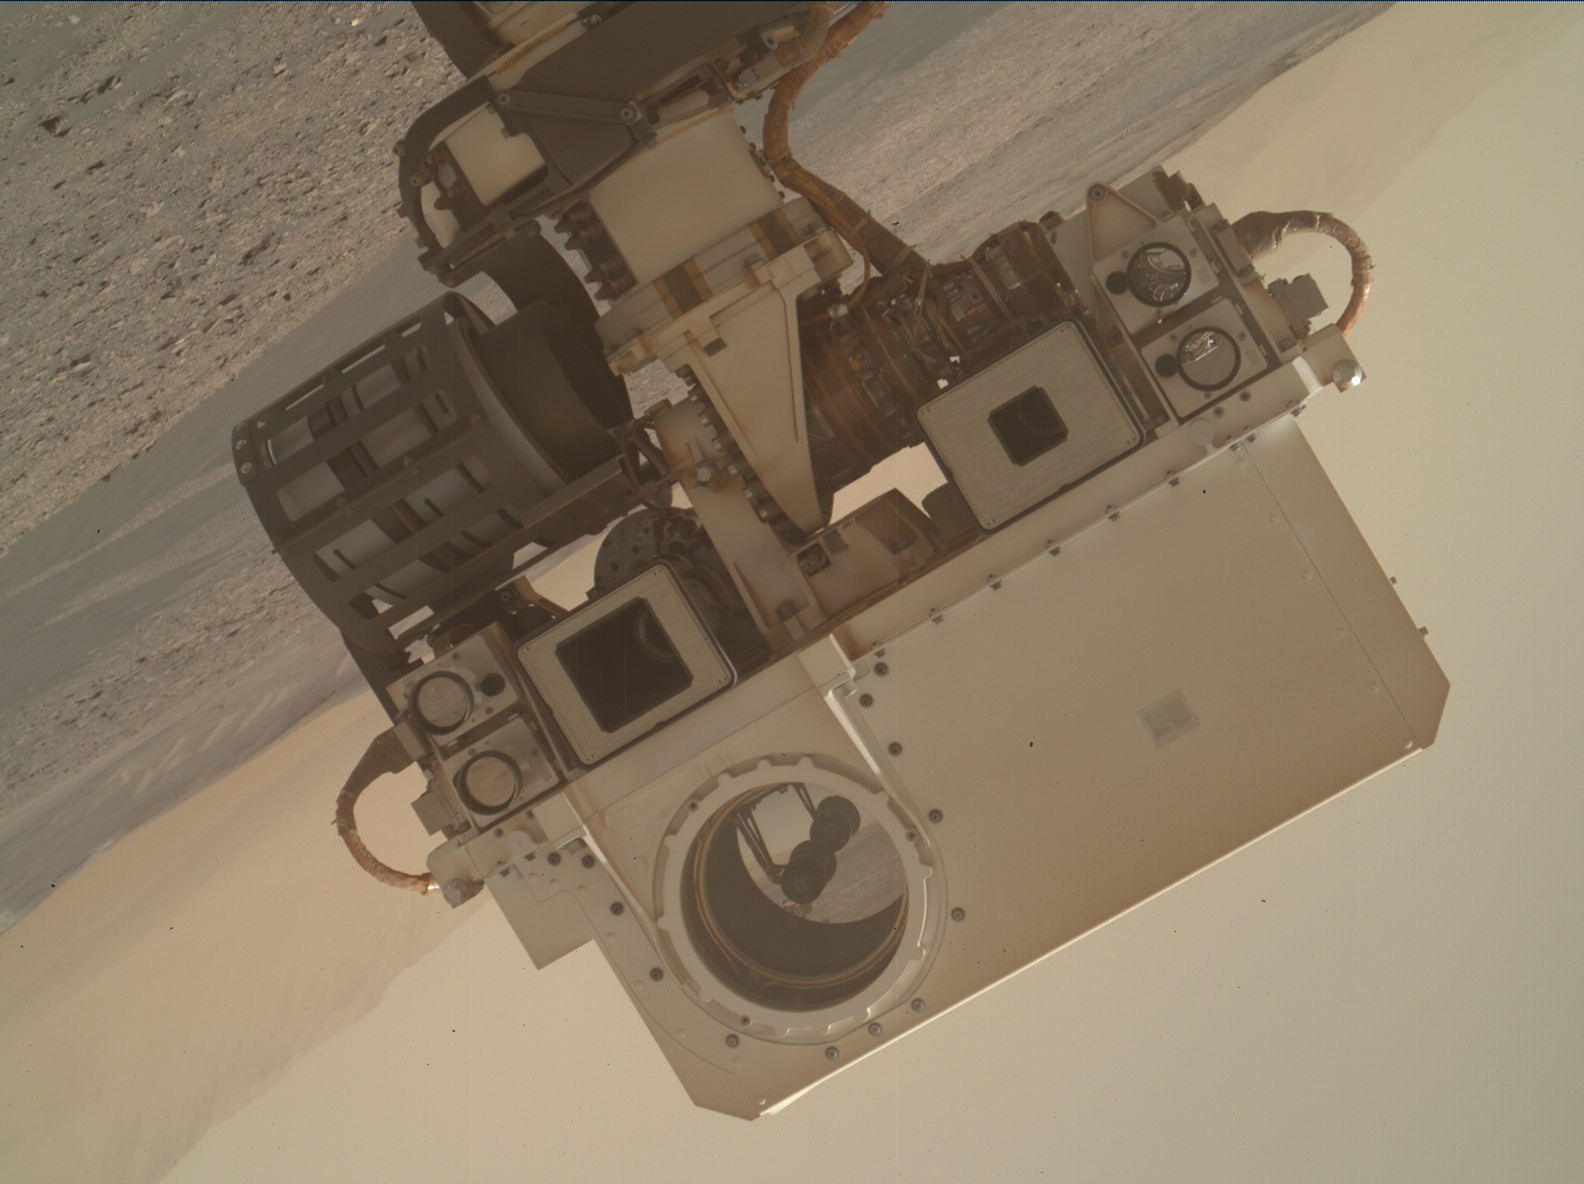 Nasa's Mars rover Curiosity acquired this image using its Mars Hand Lens Imager (MAHLI) on Sol 2922